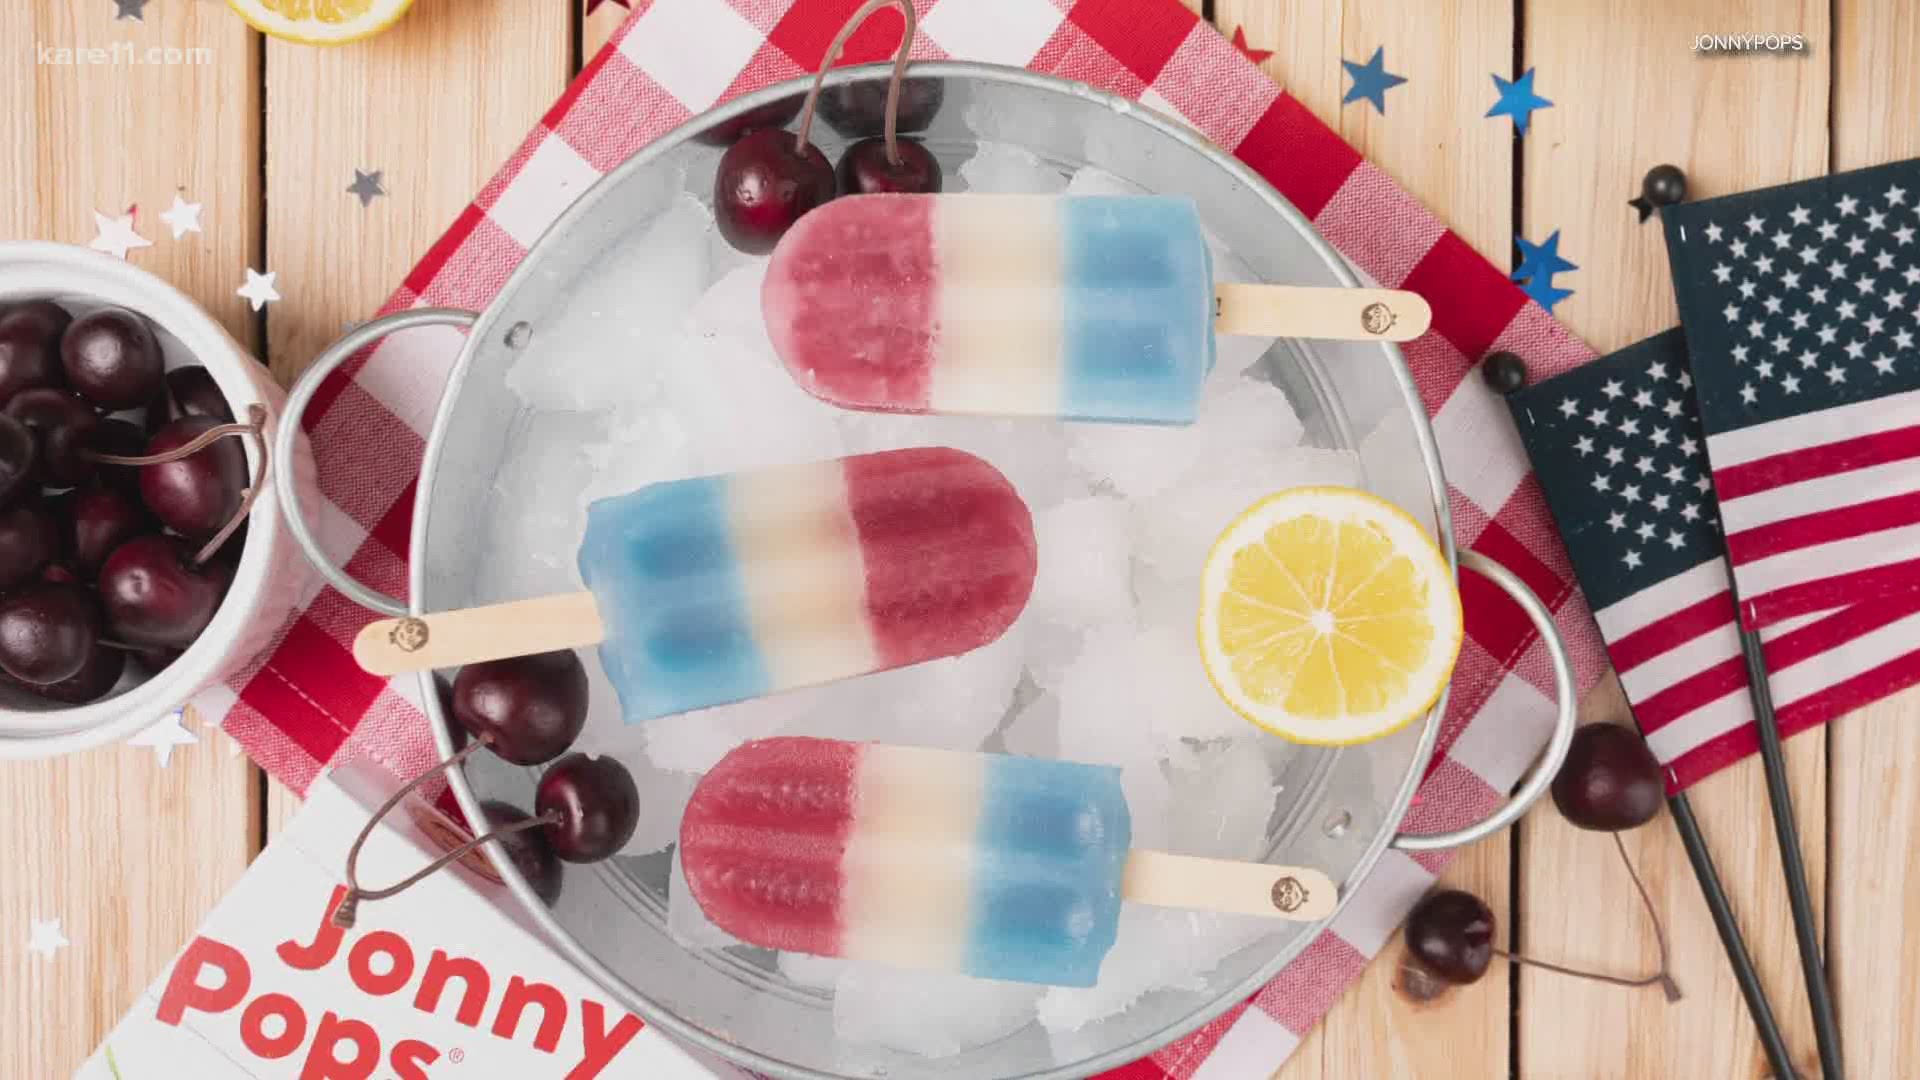 Check out these new flavors from local favorite, JonnyPops.